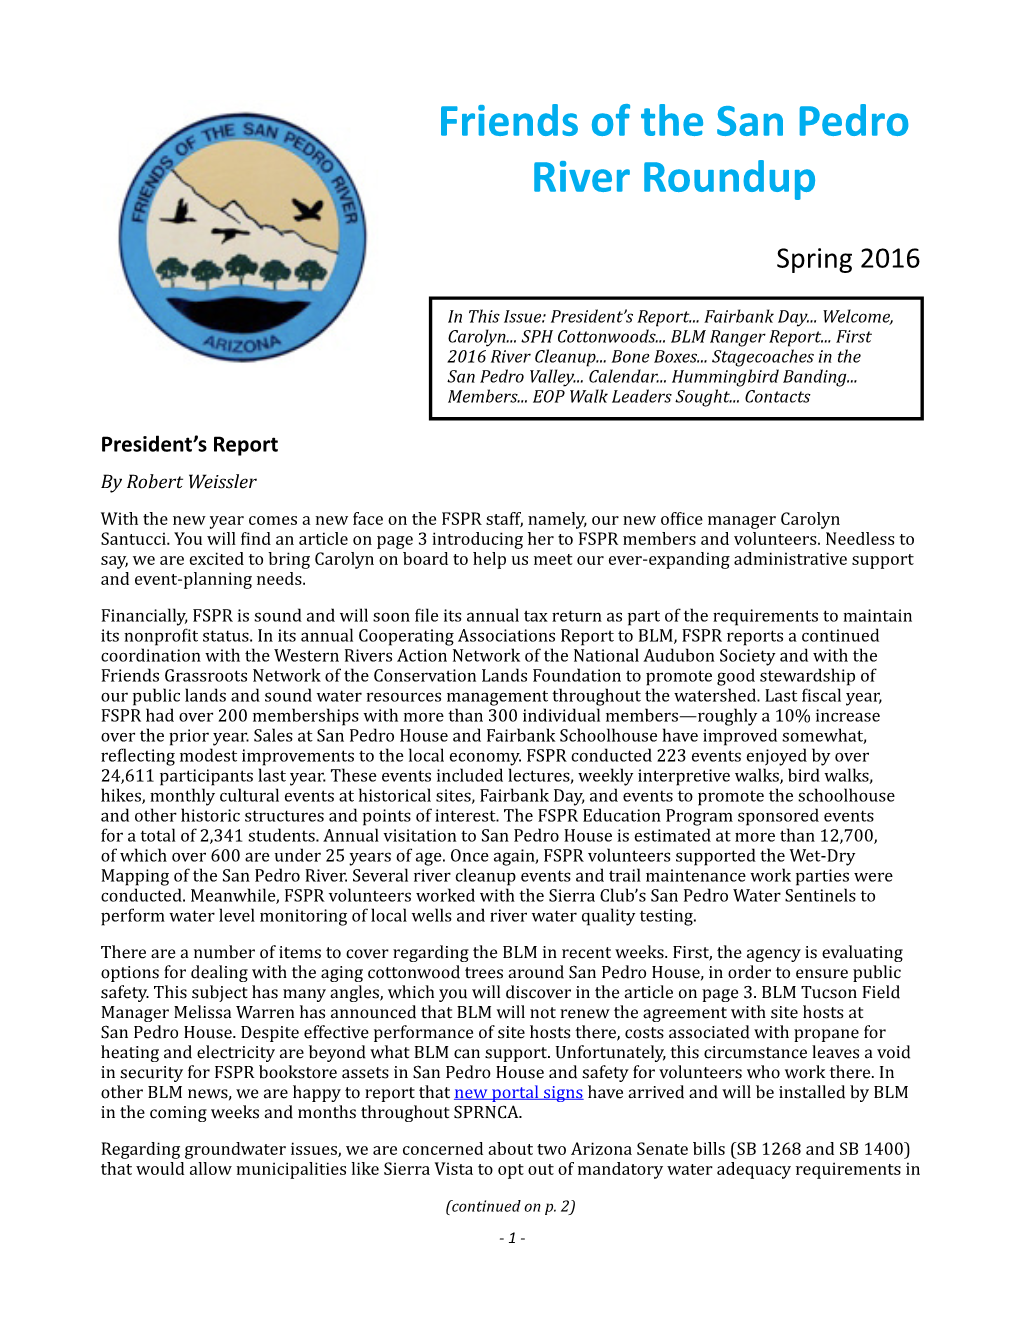 Friends of the San Pedro River Roundup